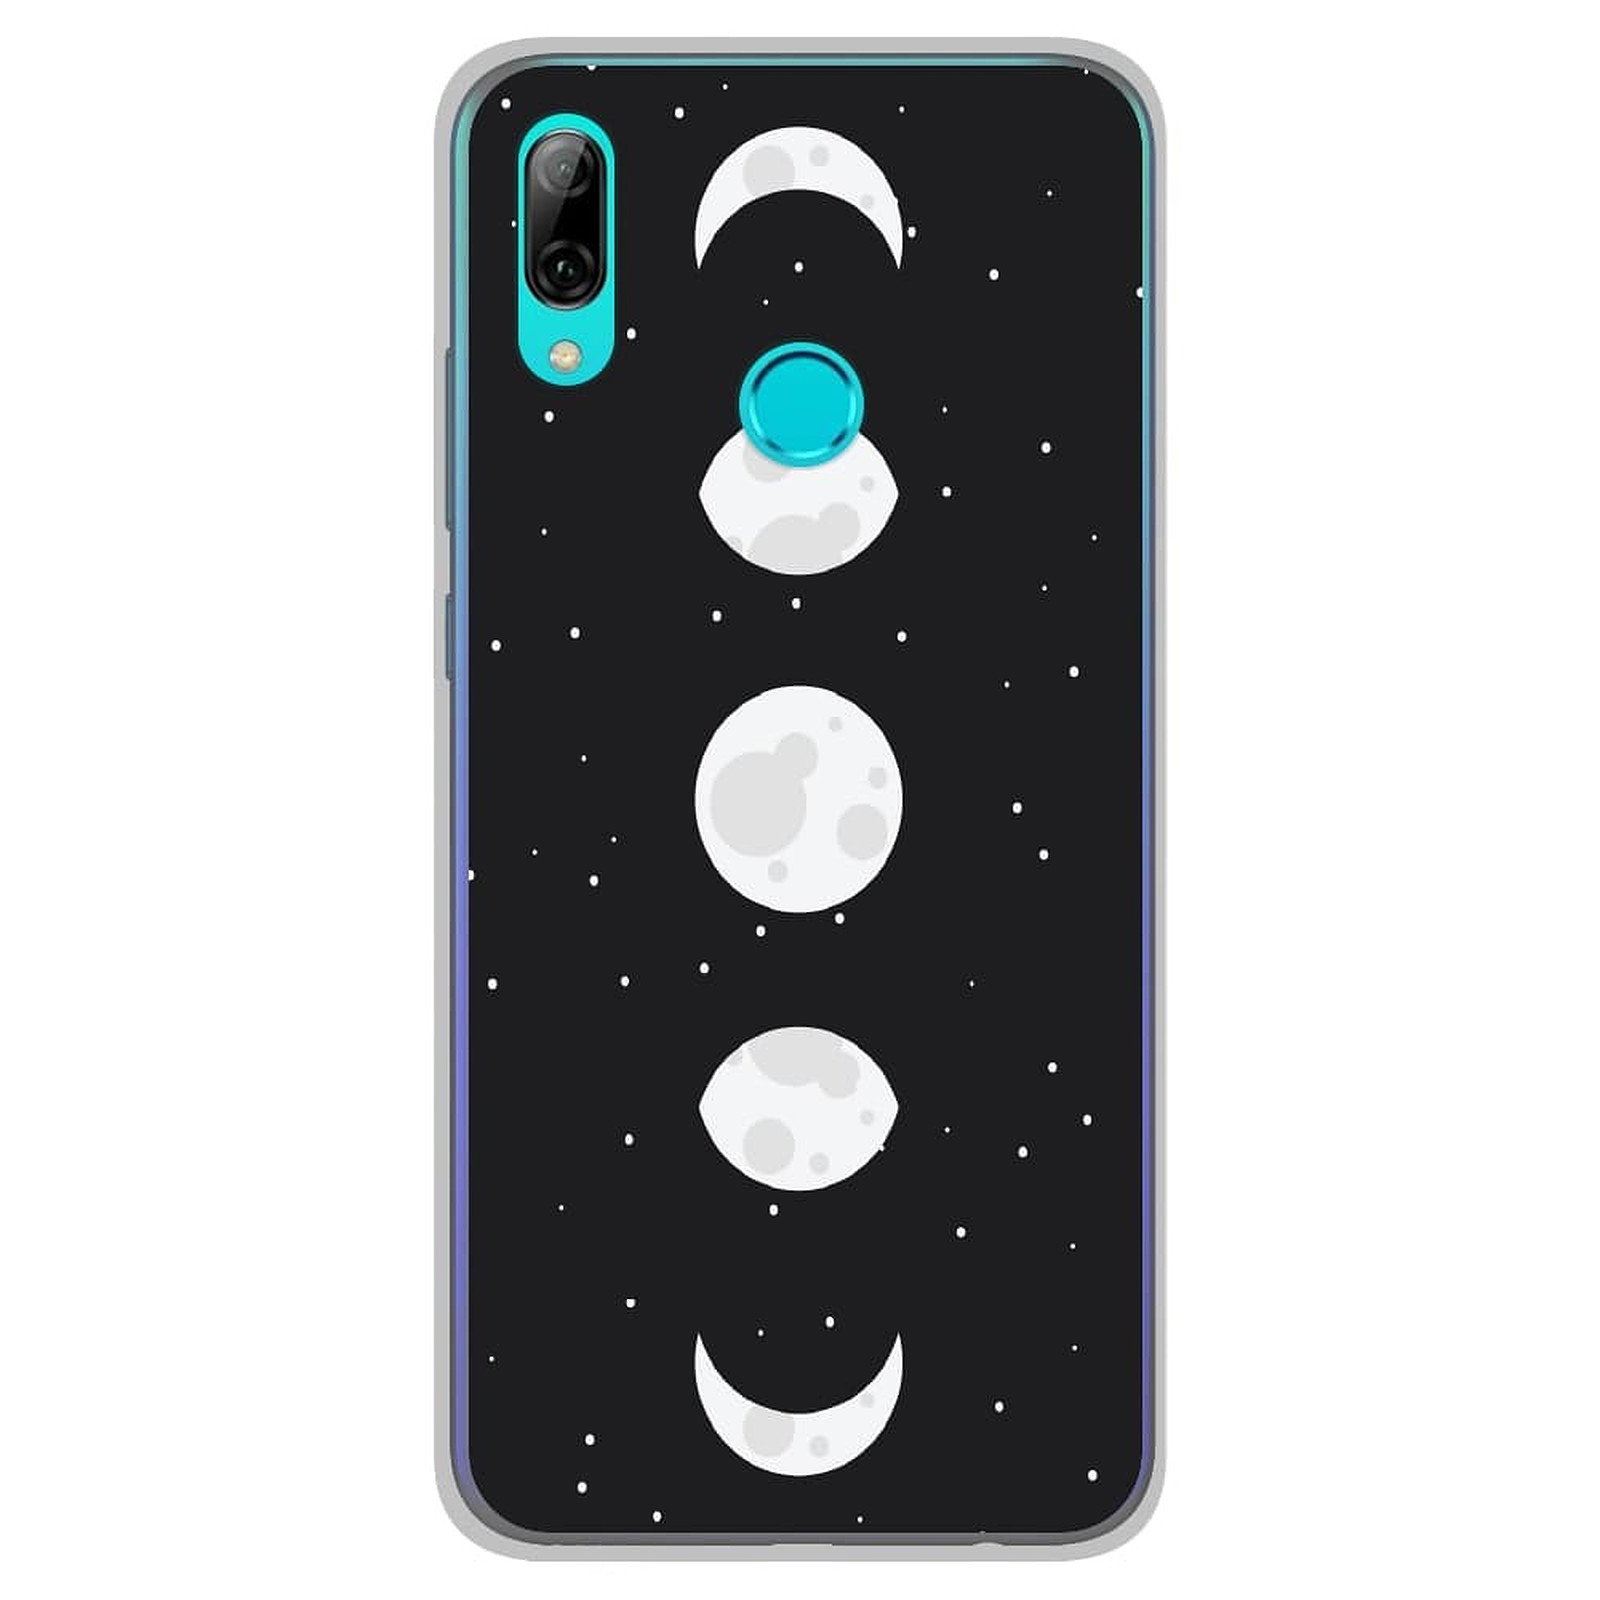 1001 Coques Coque silicone gel Huawei P Smart 2019 motif Phase de Lune - Coque telephone 1001Coques